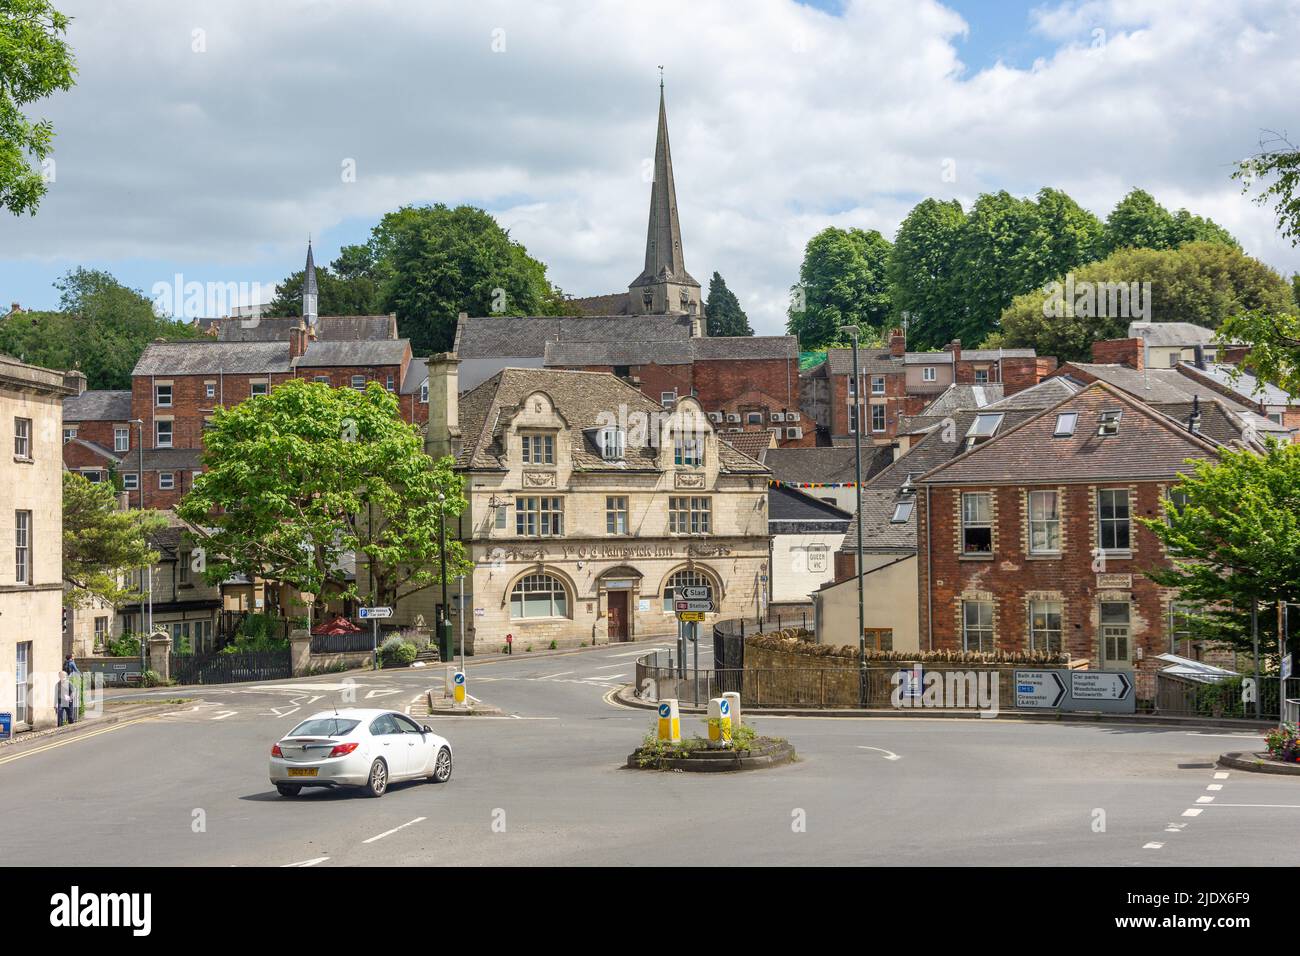 Church spire and town view from Beeches Green, Stroud, Gloucestershire, England, United Kingdom Stock Photo